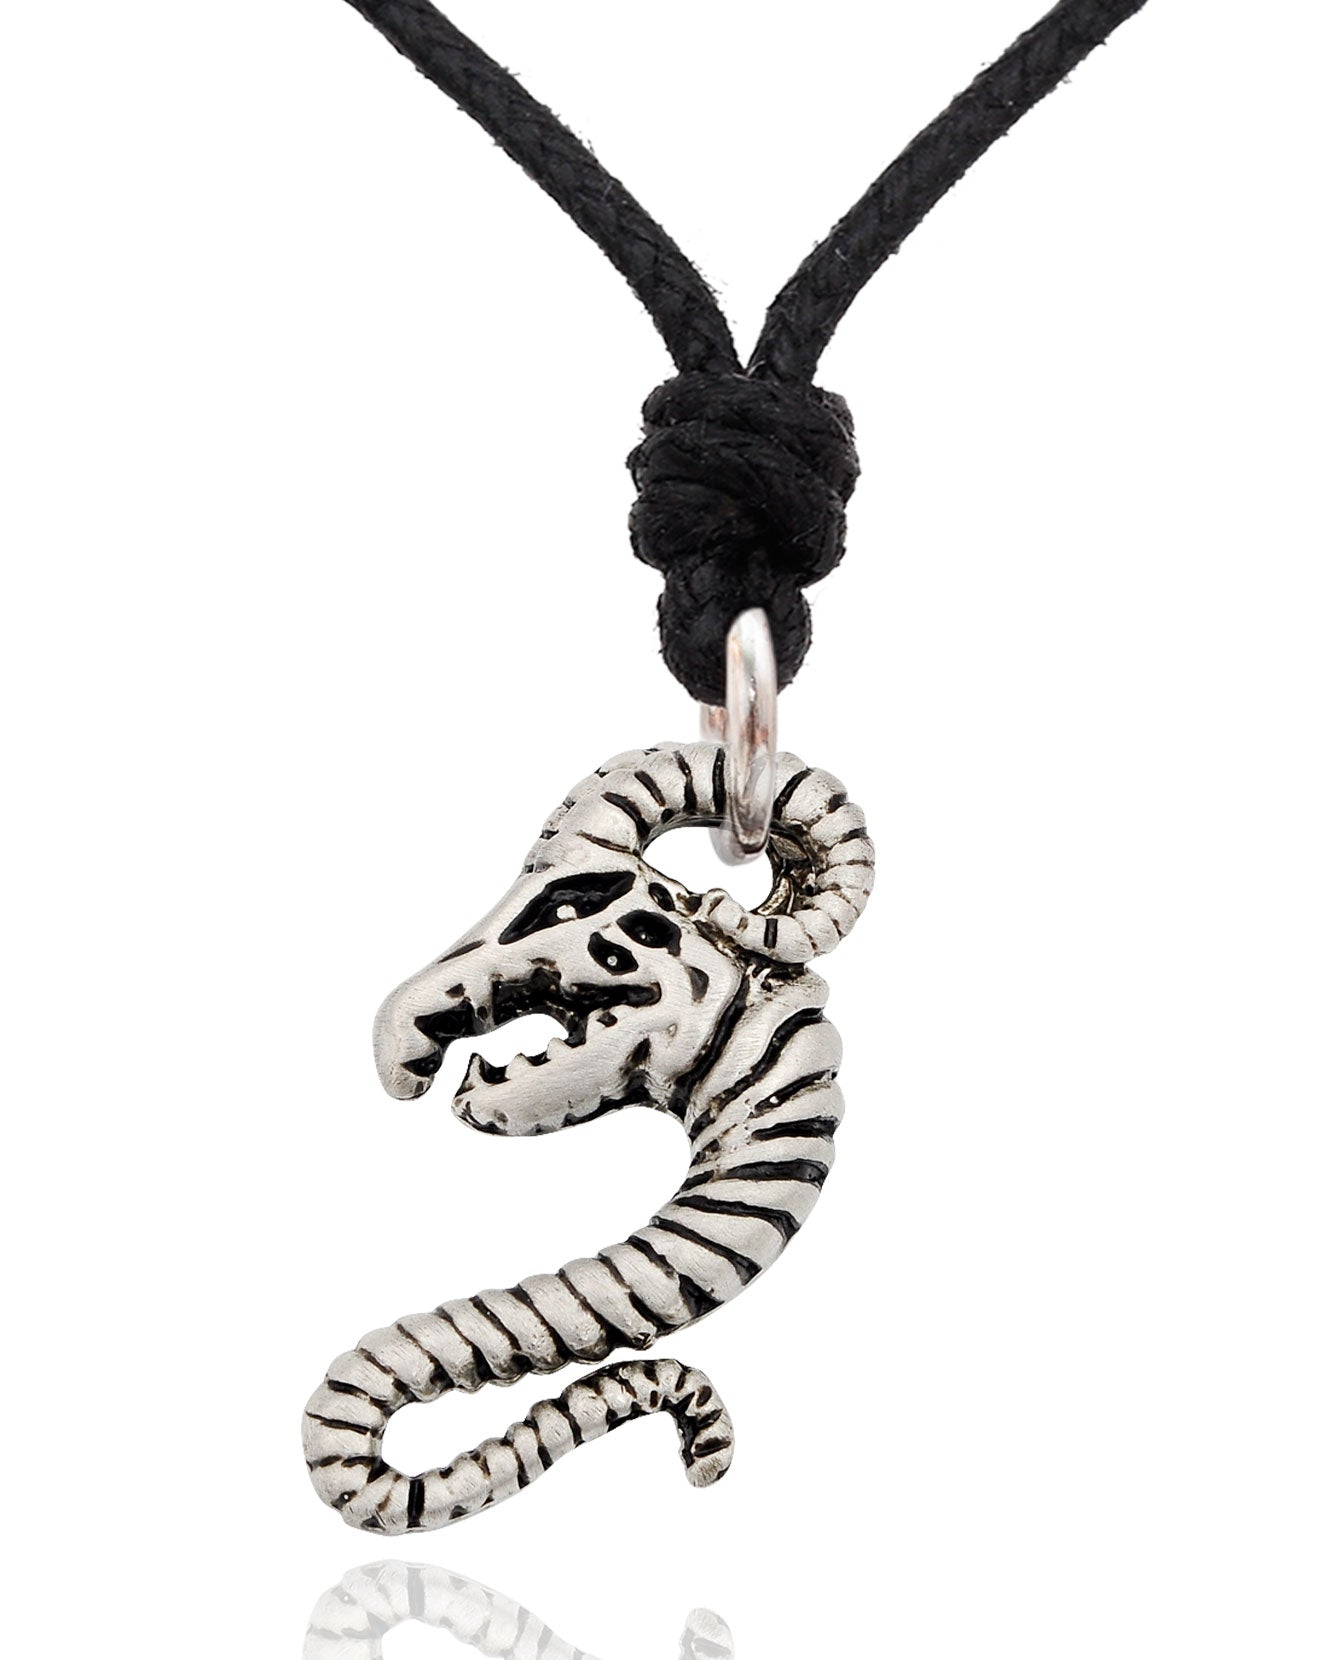 Ram Headed Serpent Silver Pewter Charm Necklace Pendant Jewelry